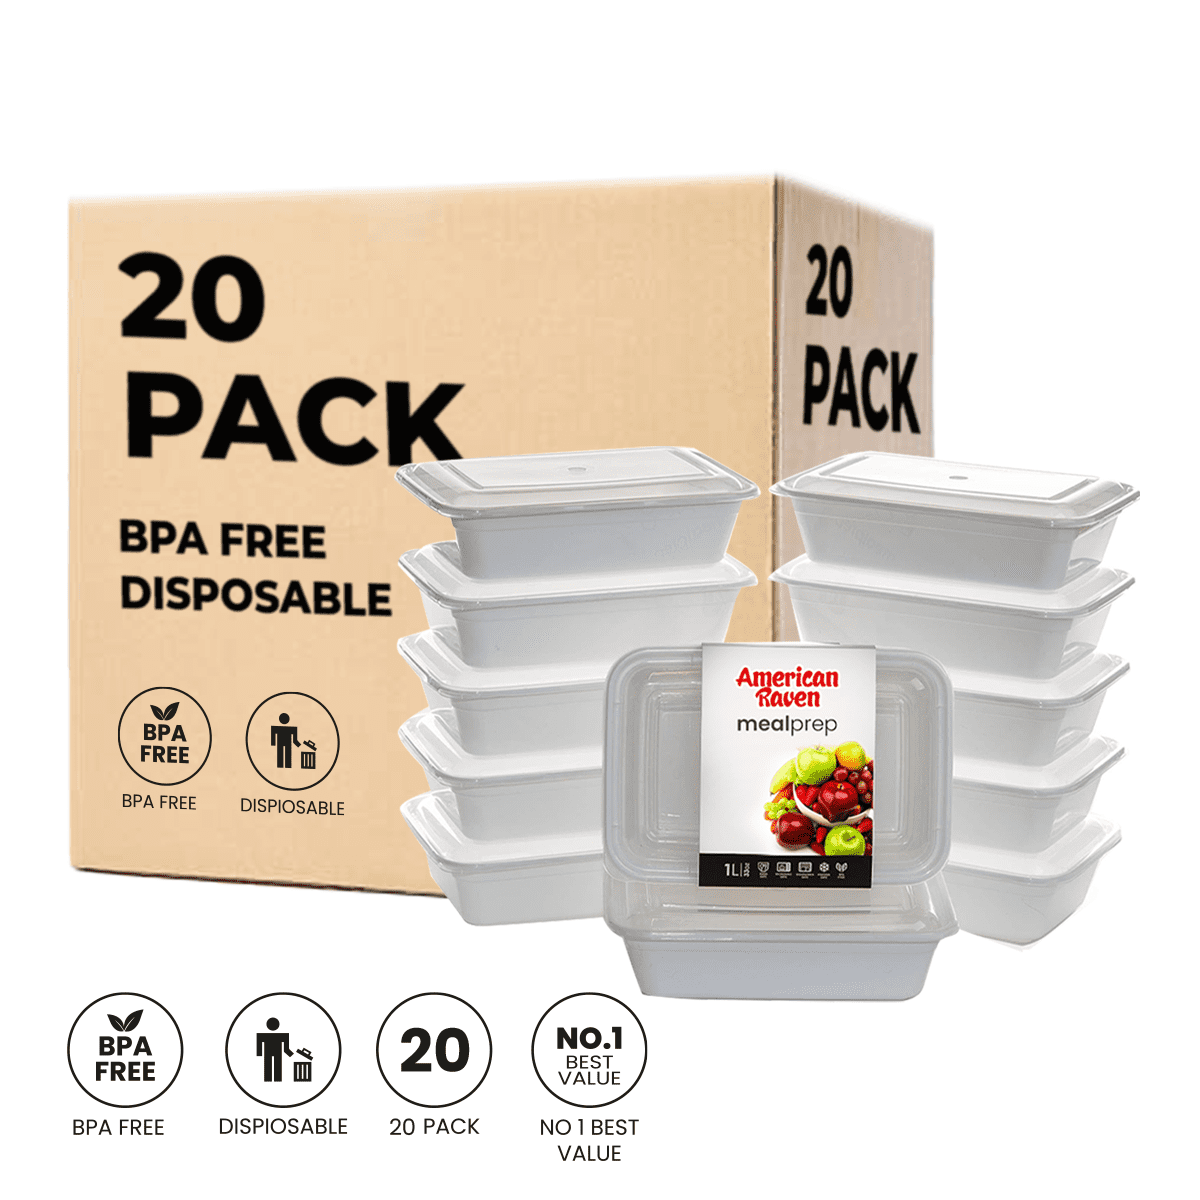 50 PACK Take Out Food Containers 26 oz Kraft Brown Paper Take Out Boxes  Microwaveable Leak and Grease Resistant Food Containers - To Go Containers  for Restaurant, Catering - Recyclable Lunch Box #1 